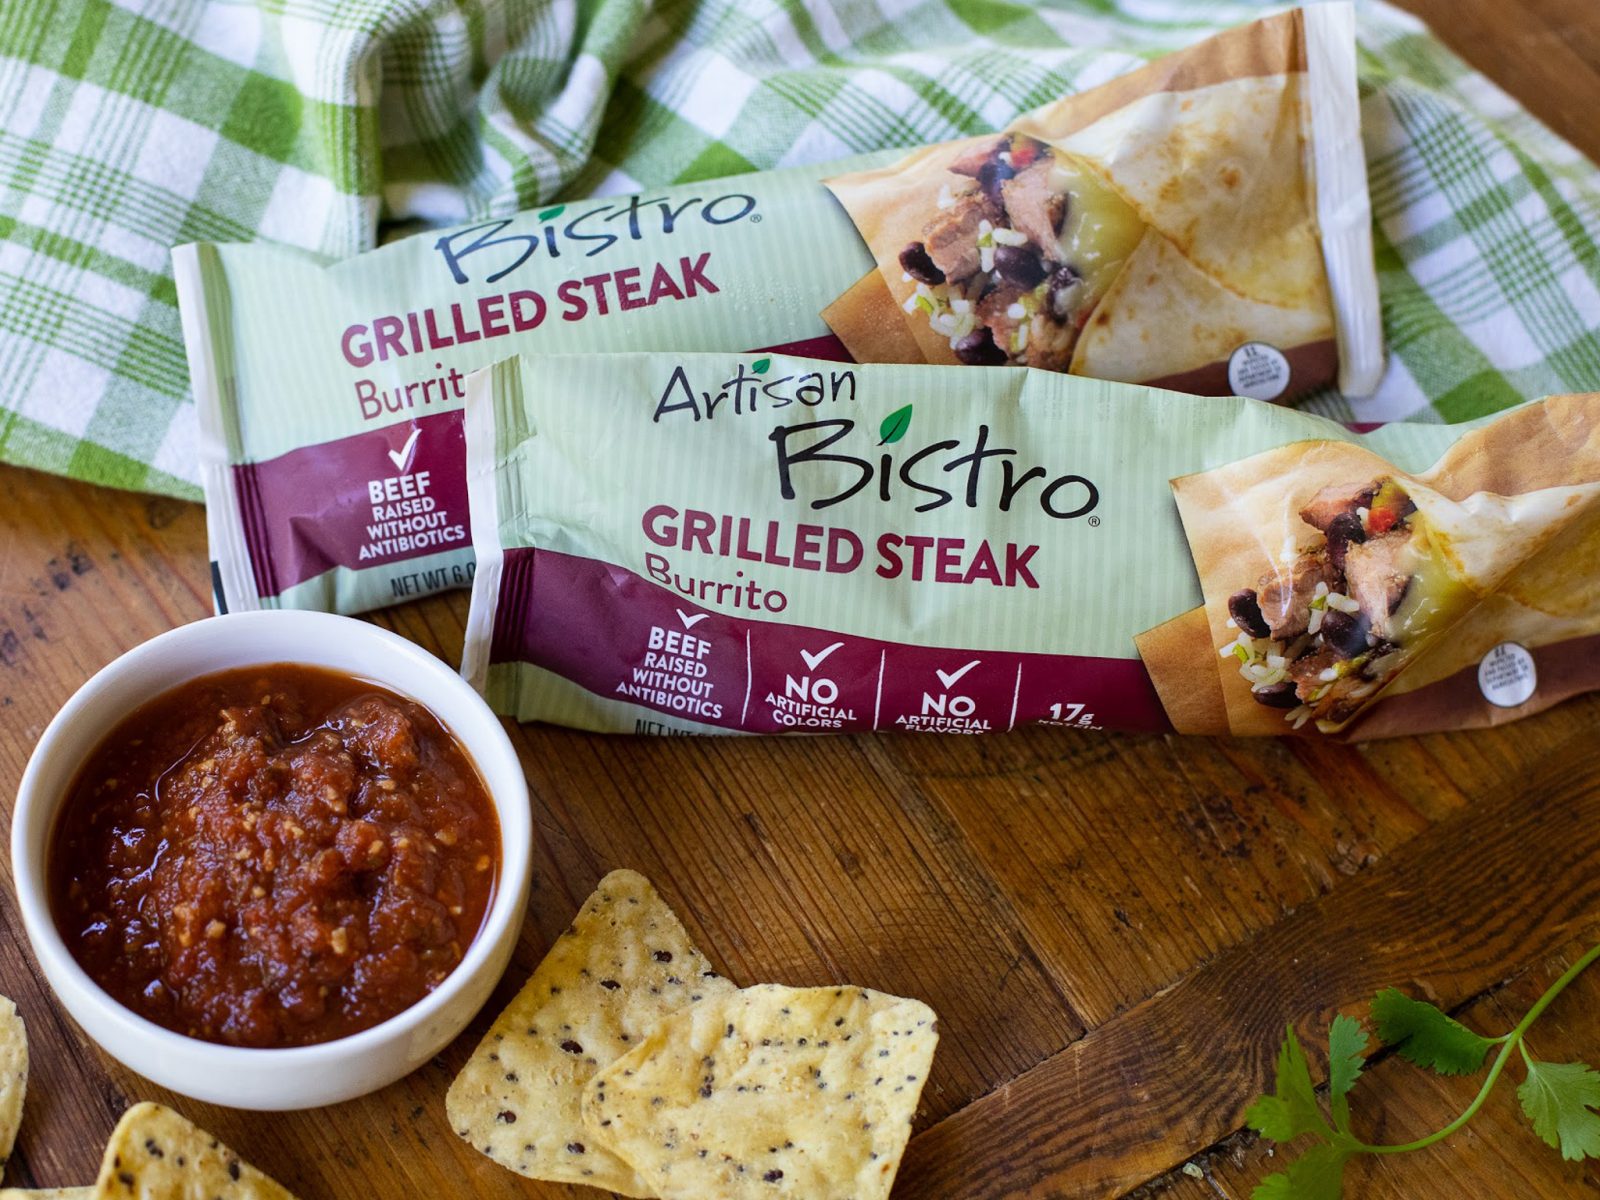 Grab An Artisan Bistro Burrito For As Low As FREE At Publix